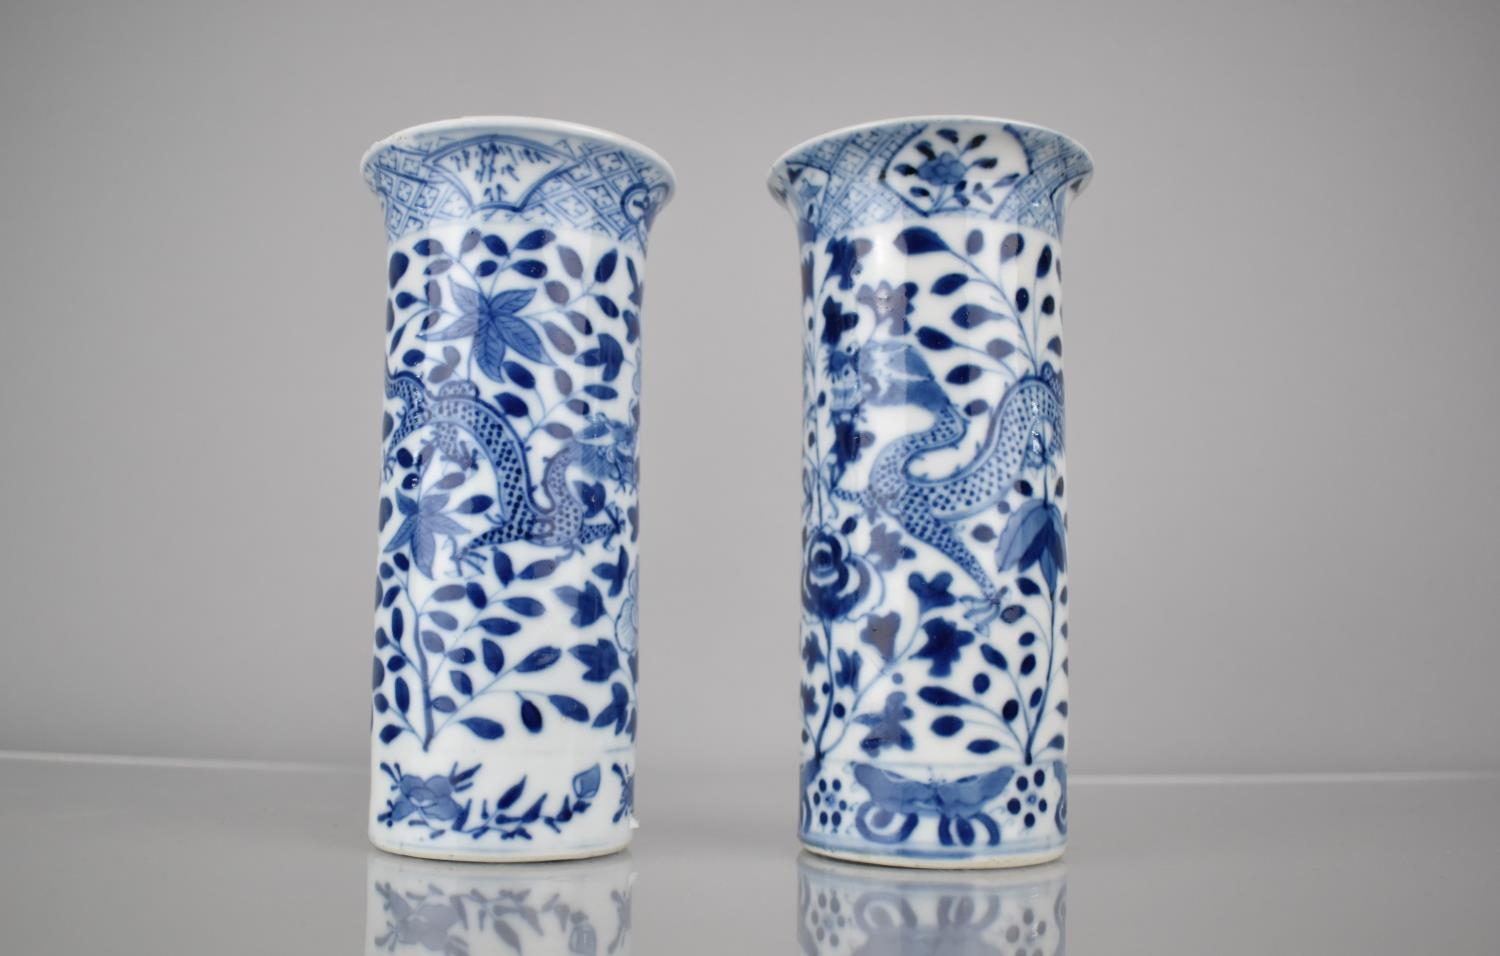 A Near Pair of 19th/20th Century Chinese Porcelain Sleeve Vases Decorated with Dragons Amongst